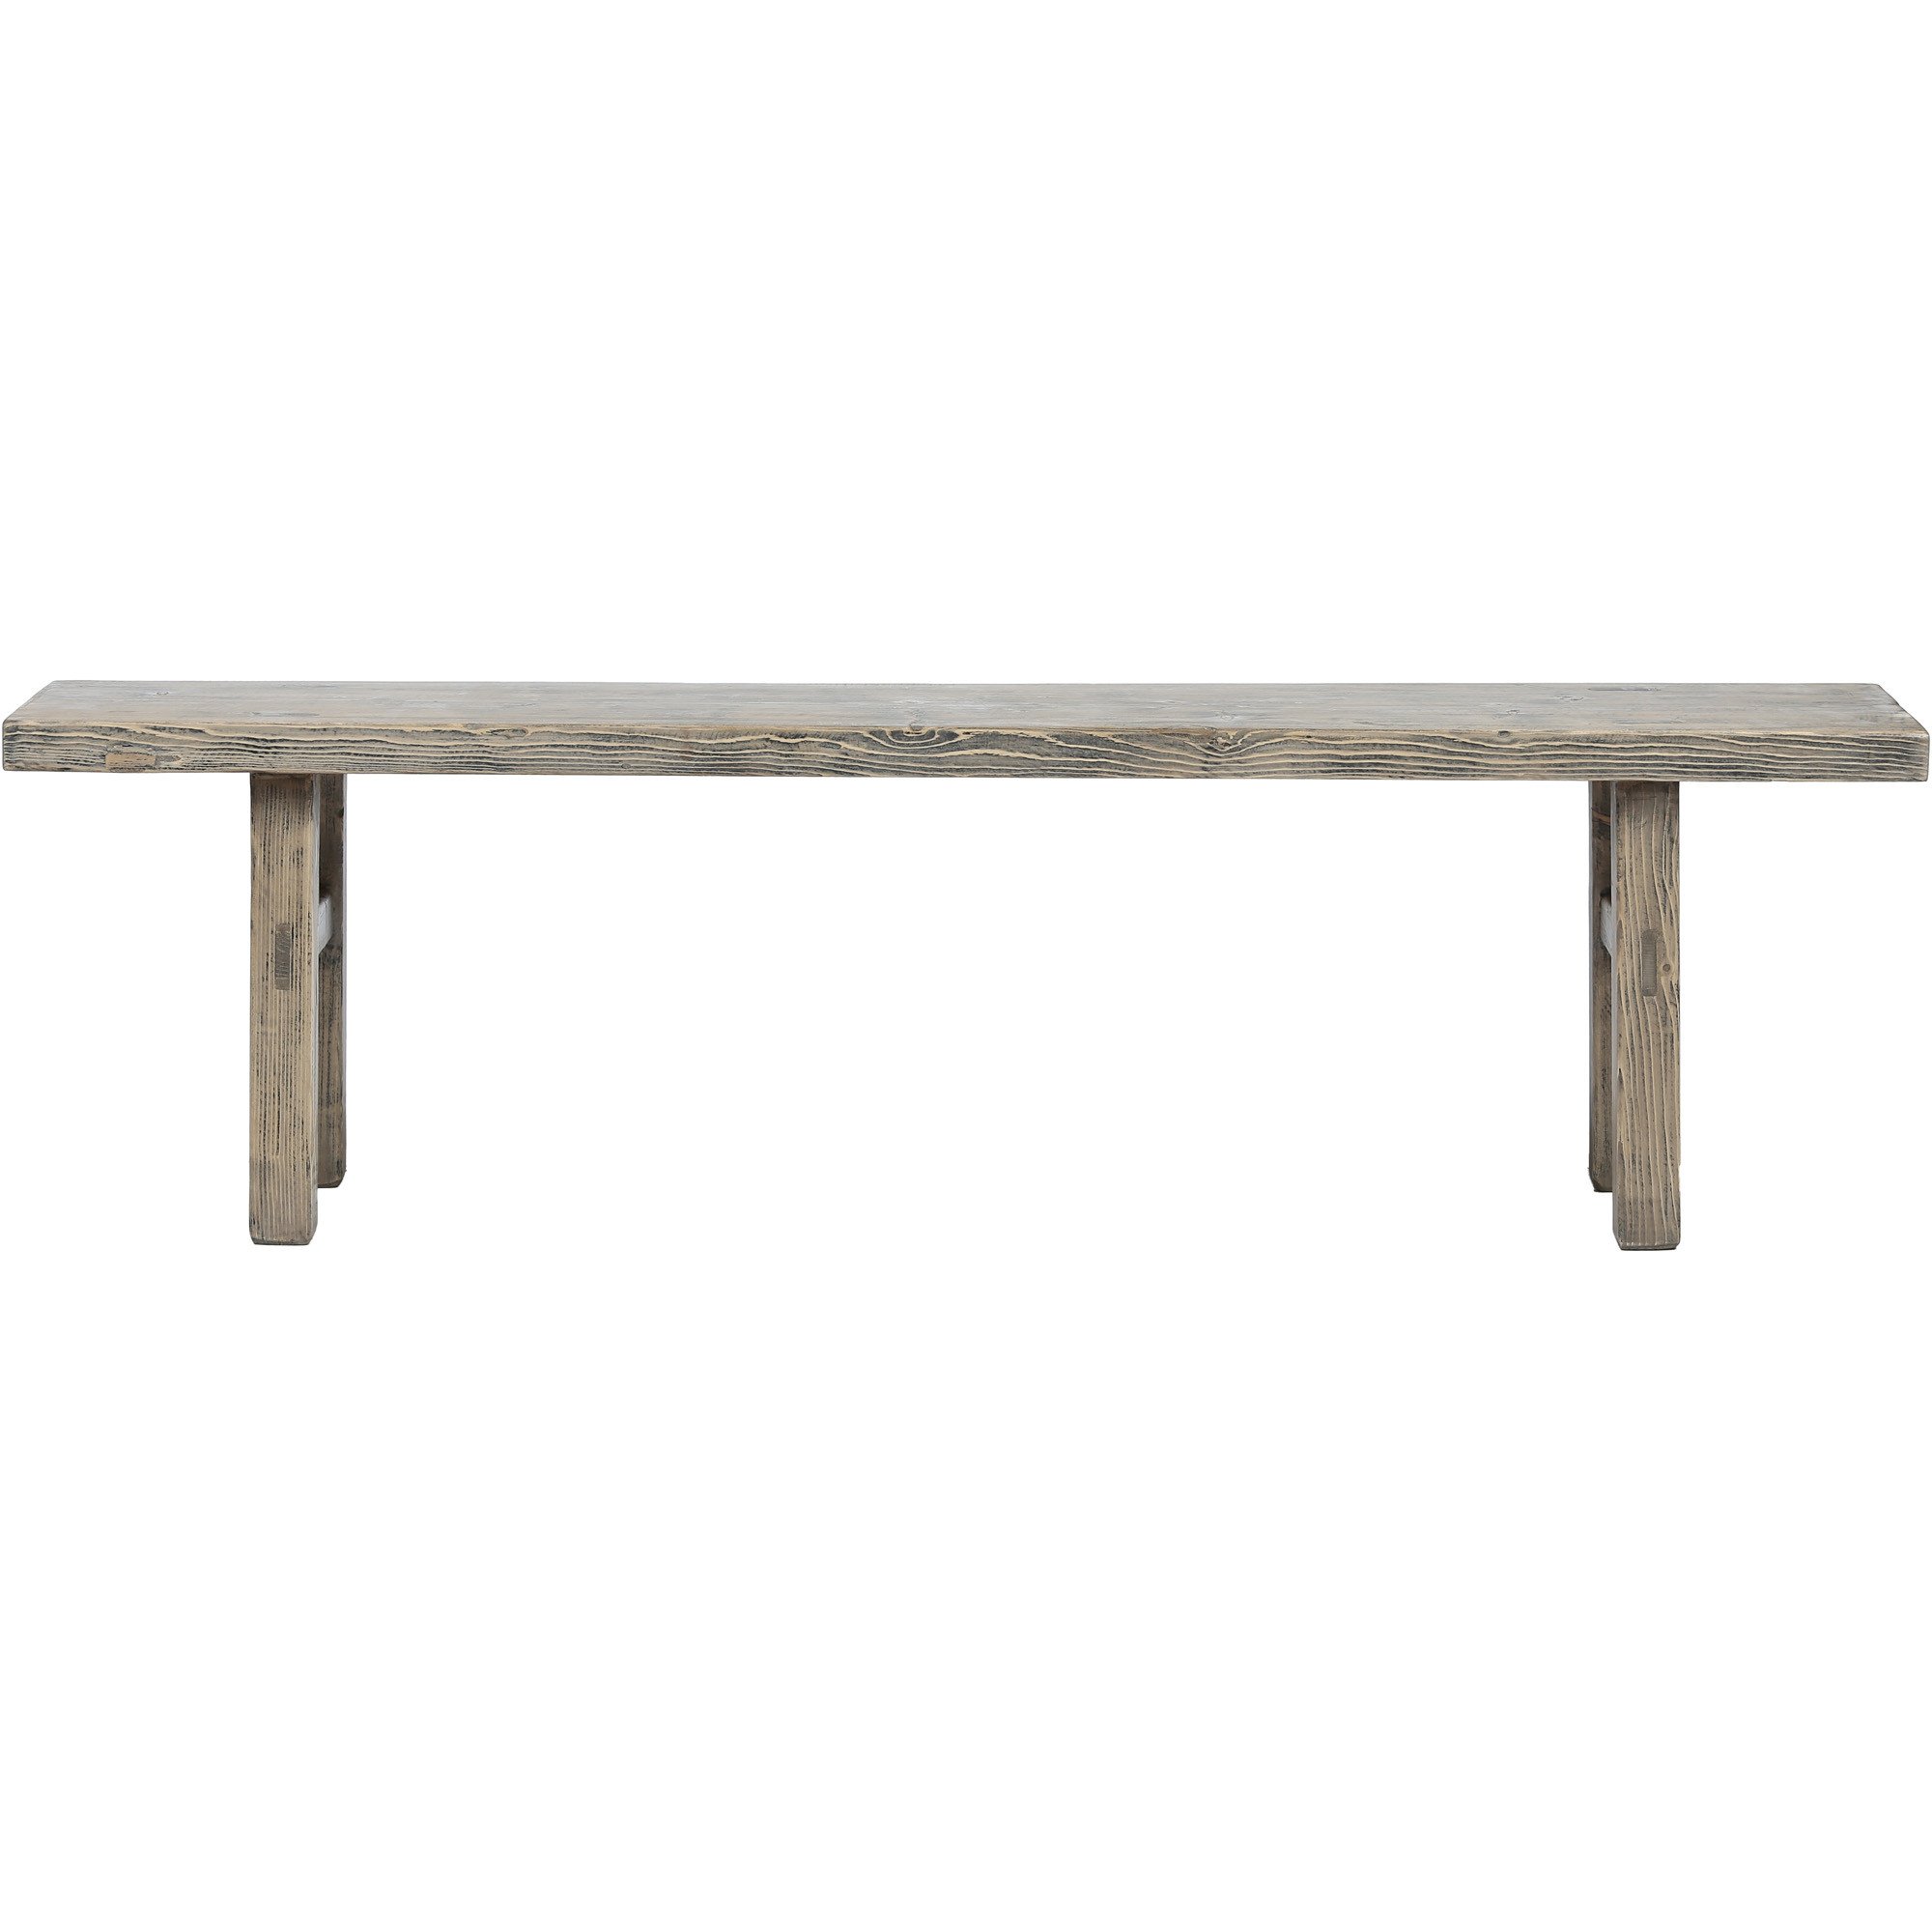 Contemporary Chinese Wooden Bench | Rouge